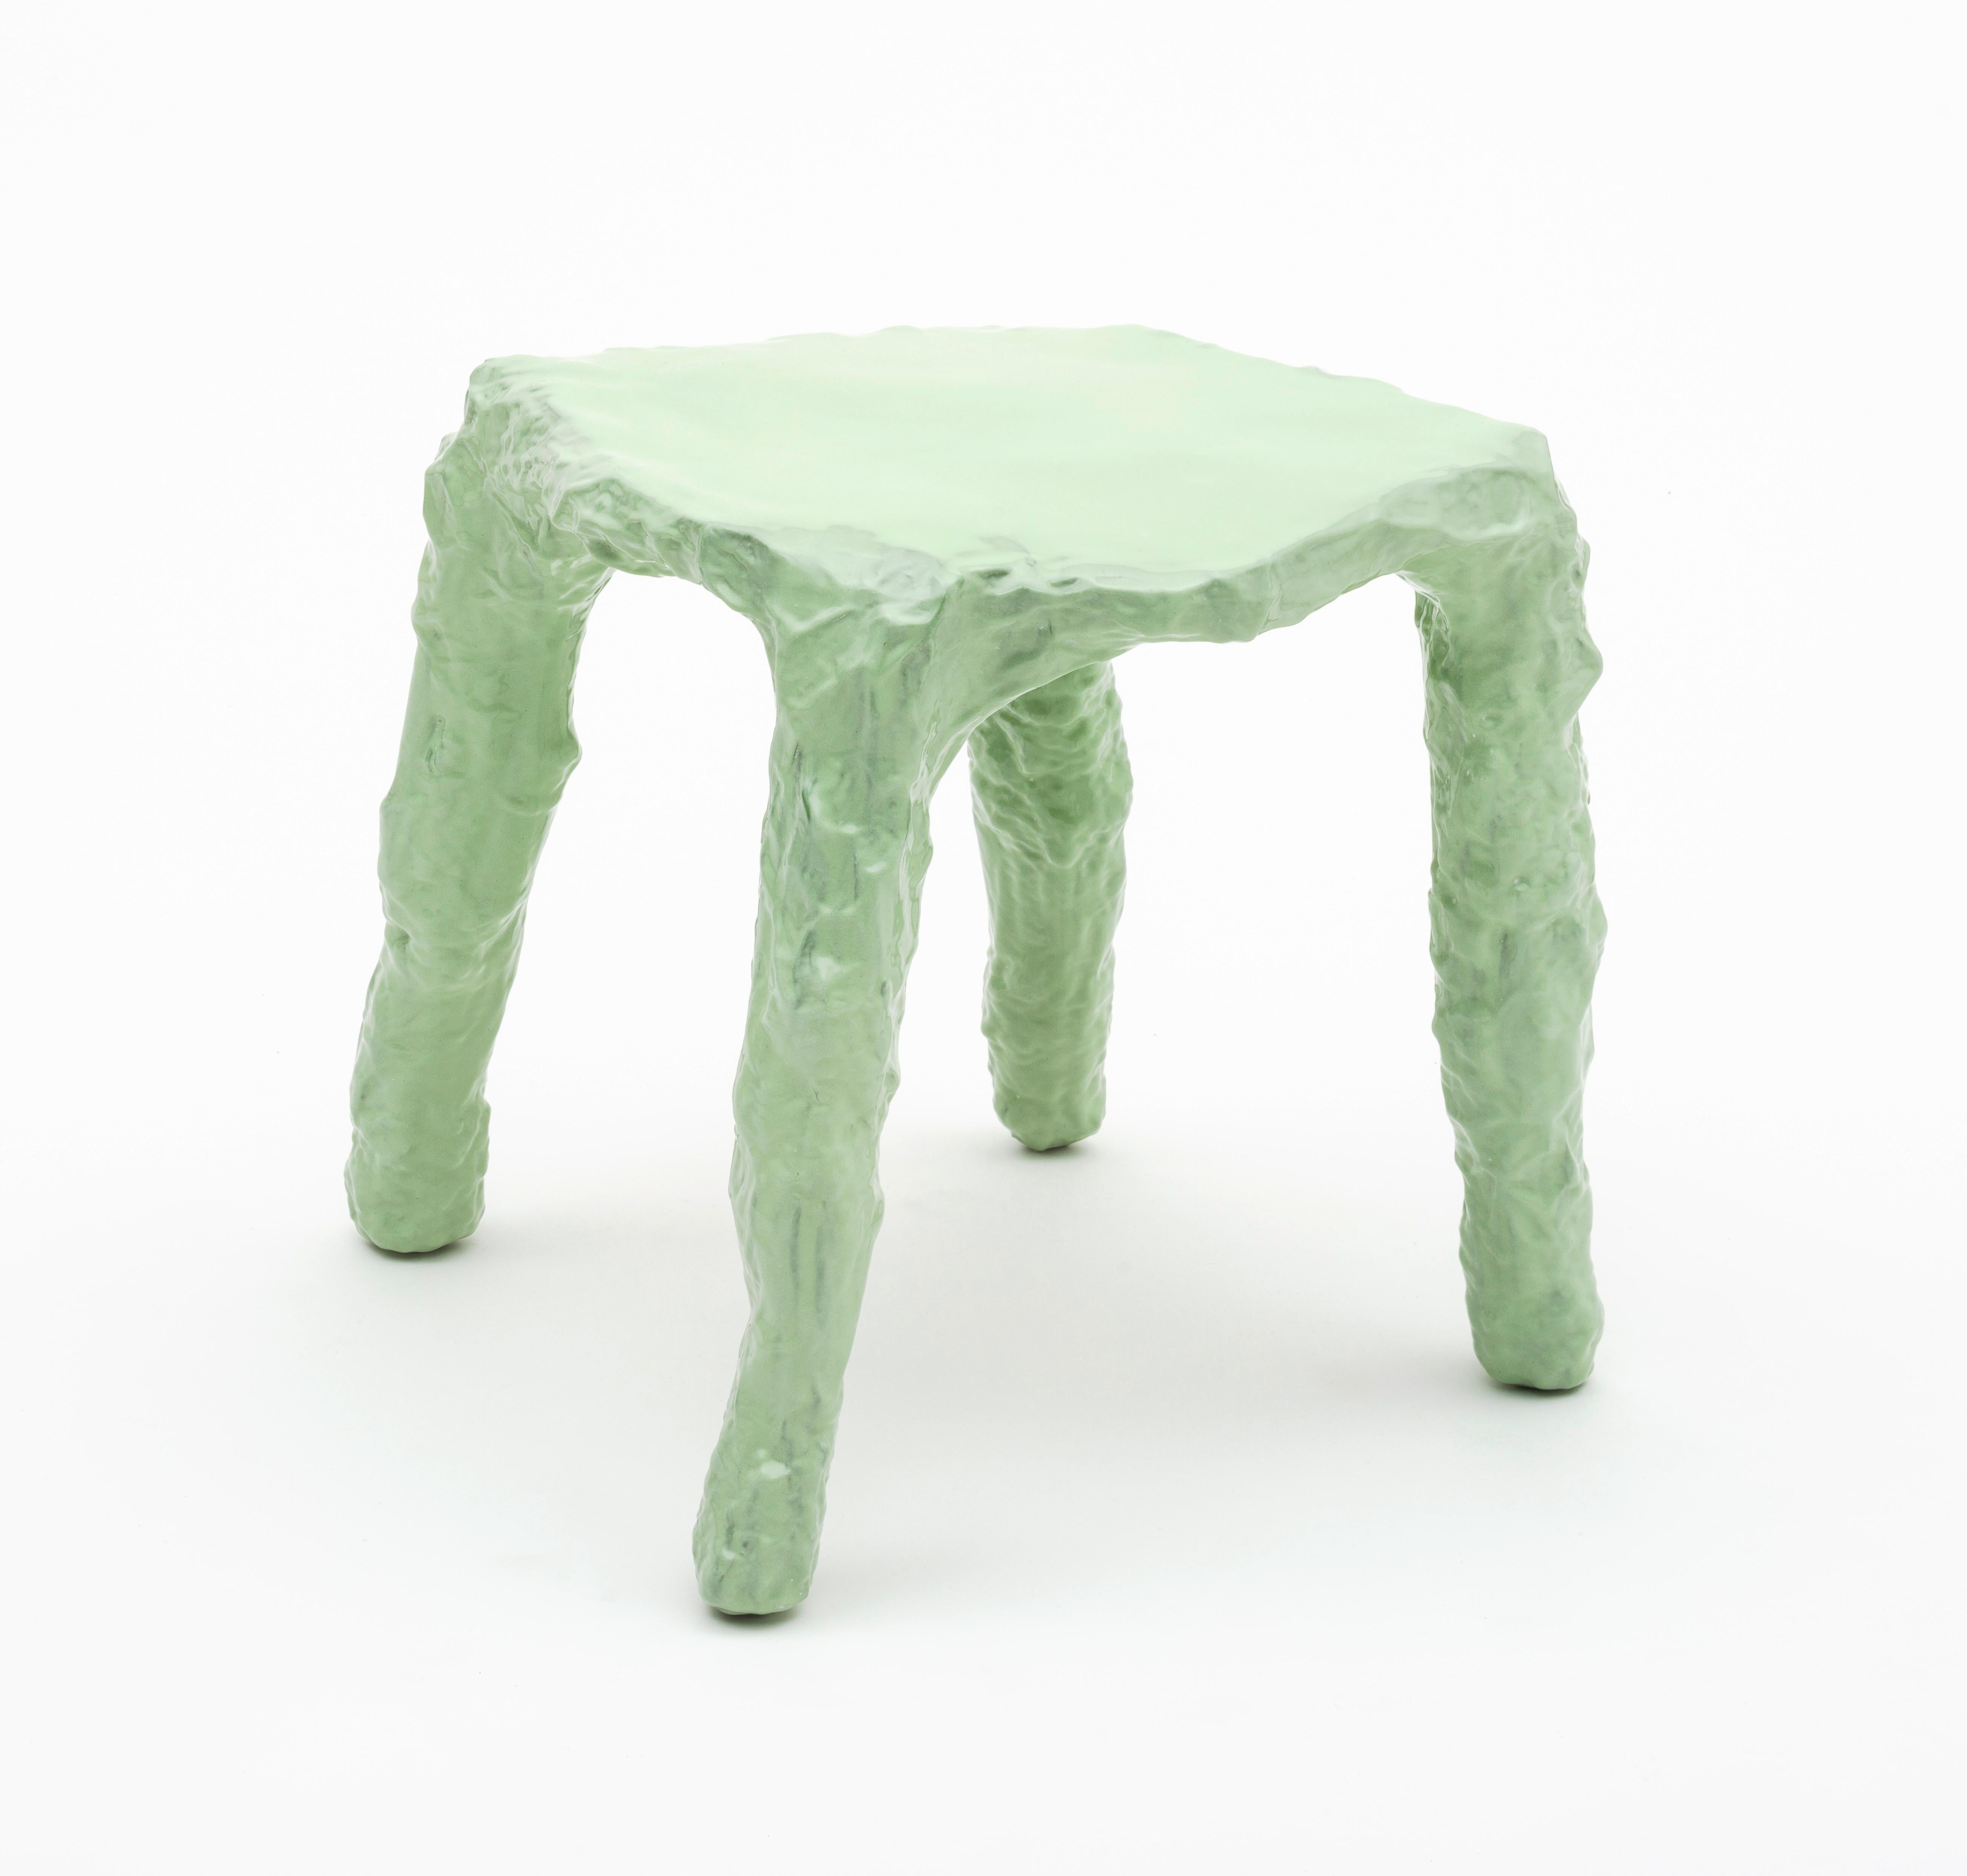 Thanatos stool by Philipp Aduatz
Edition of 50 + 1 Prototype
Dimensions: 45 × 45 × 45 cm
Materials: Resin-marble composite, Polished
37 kilograms

Available in different colours.



Vienna based Designer Philipp Aduatz (born 1982) creates